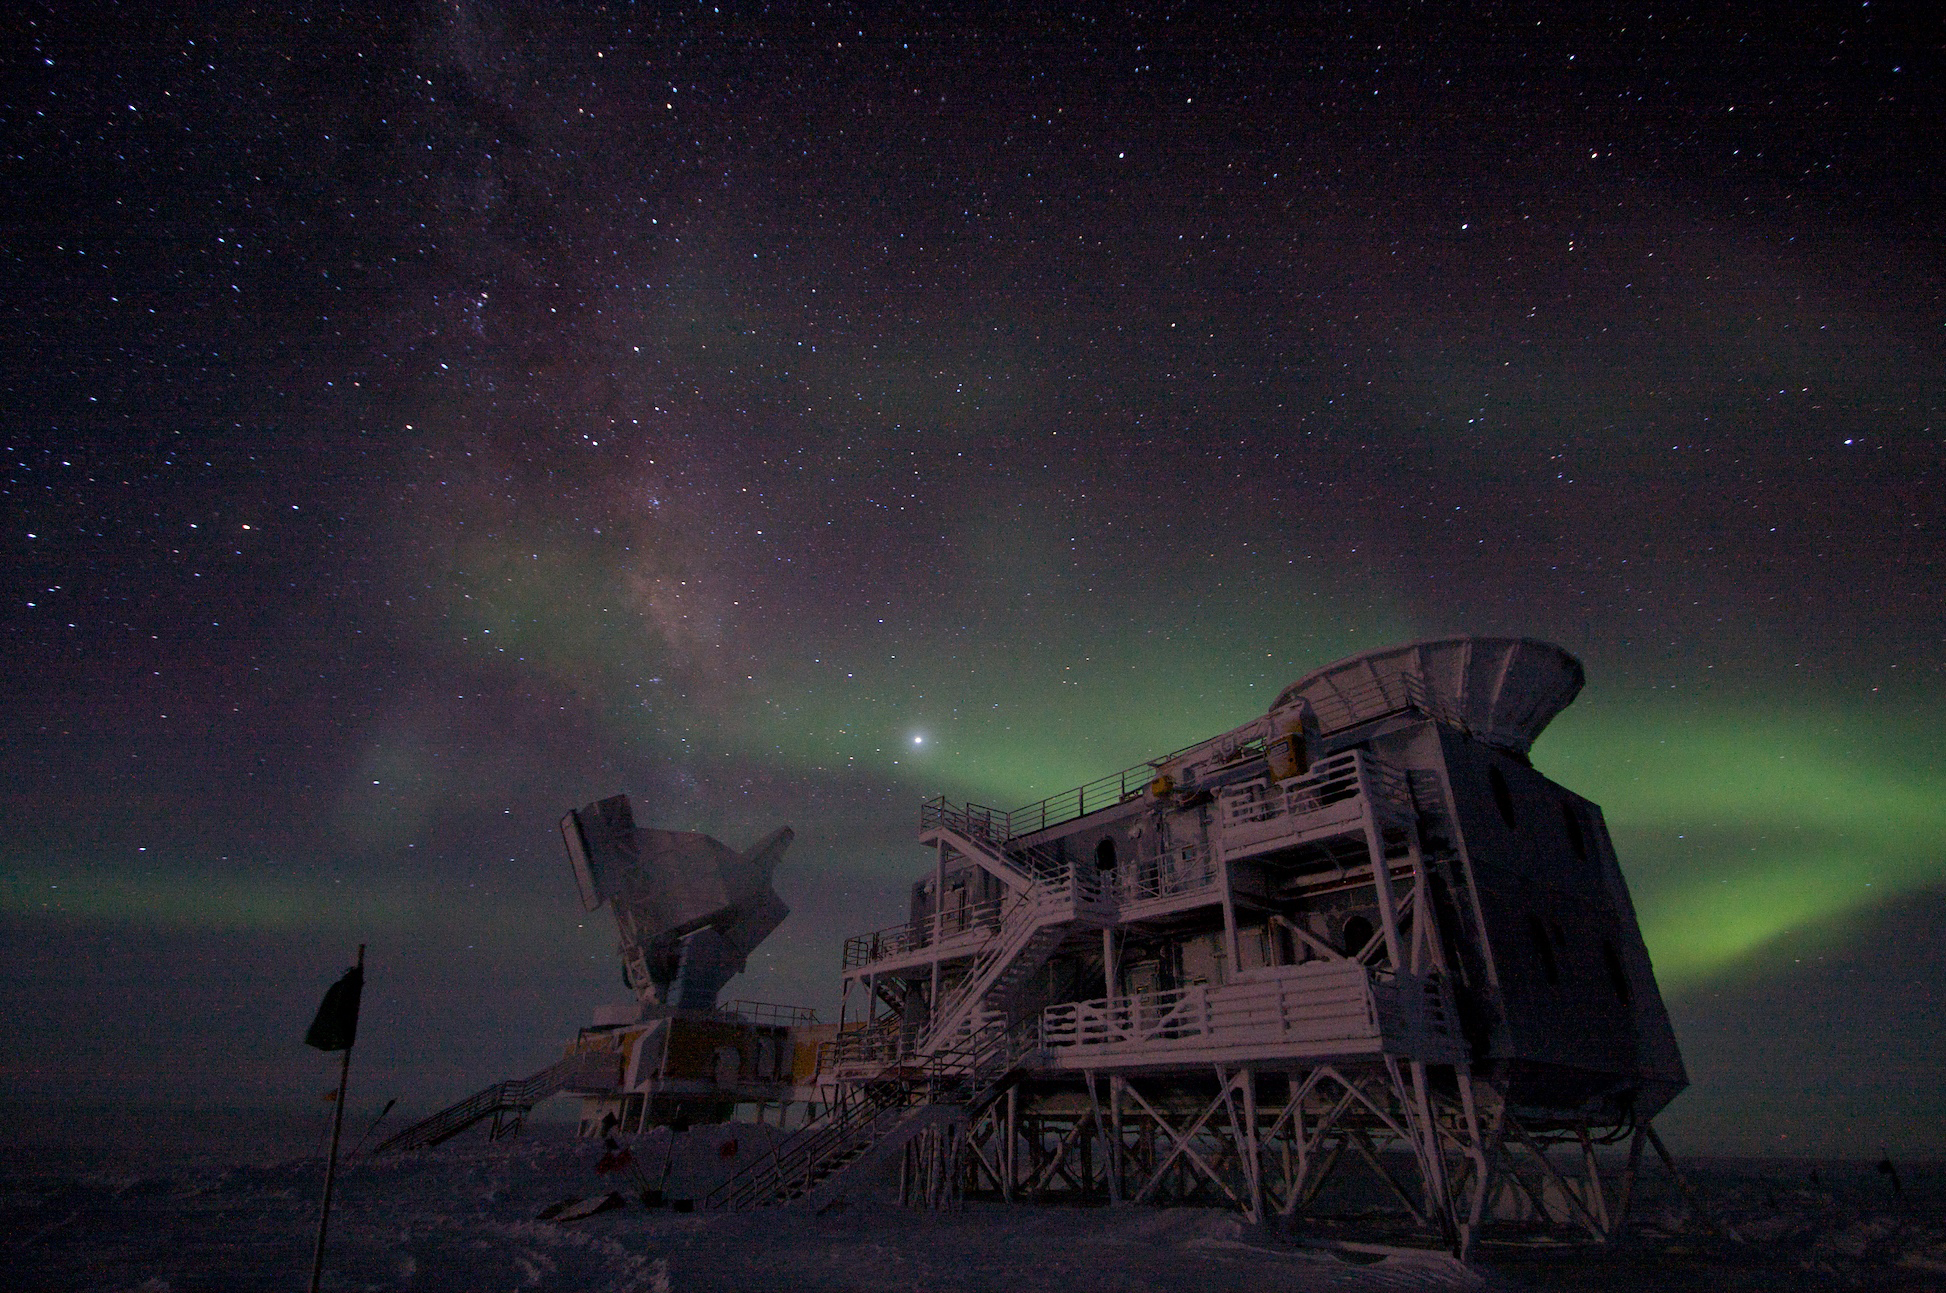 Aurora and night sky offer dramatic backdrop to science buildings at the South Pole.